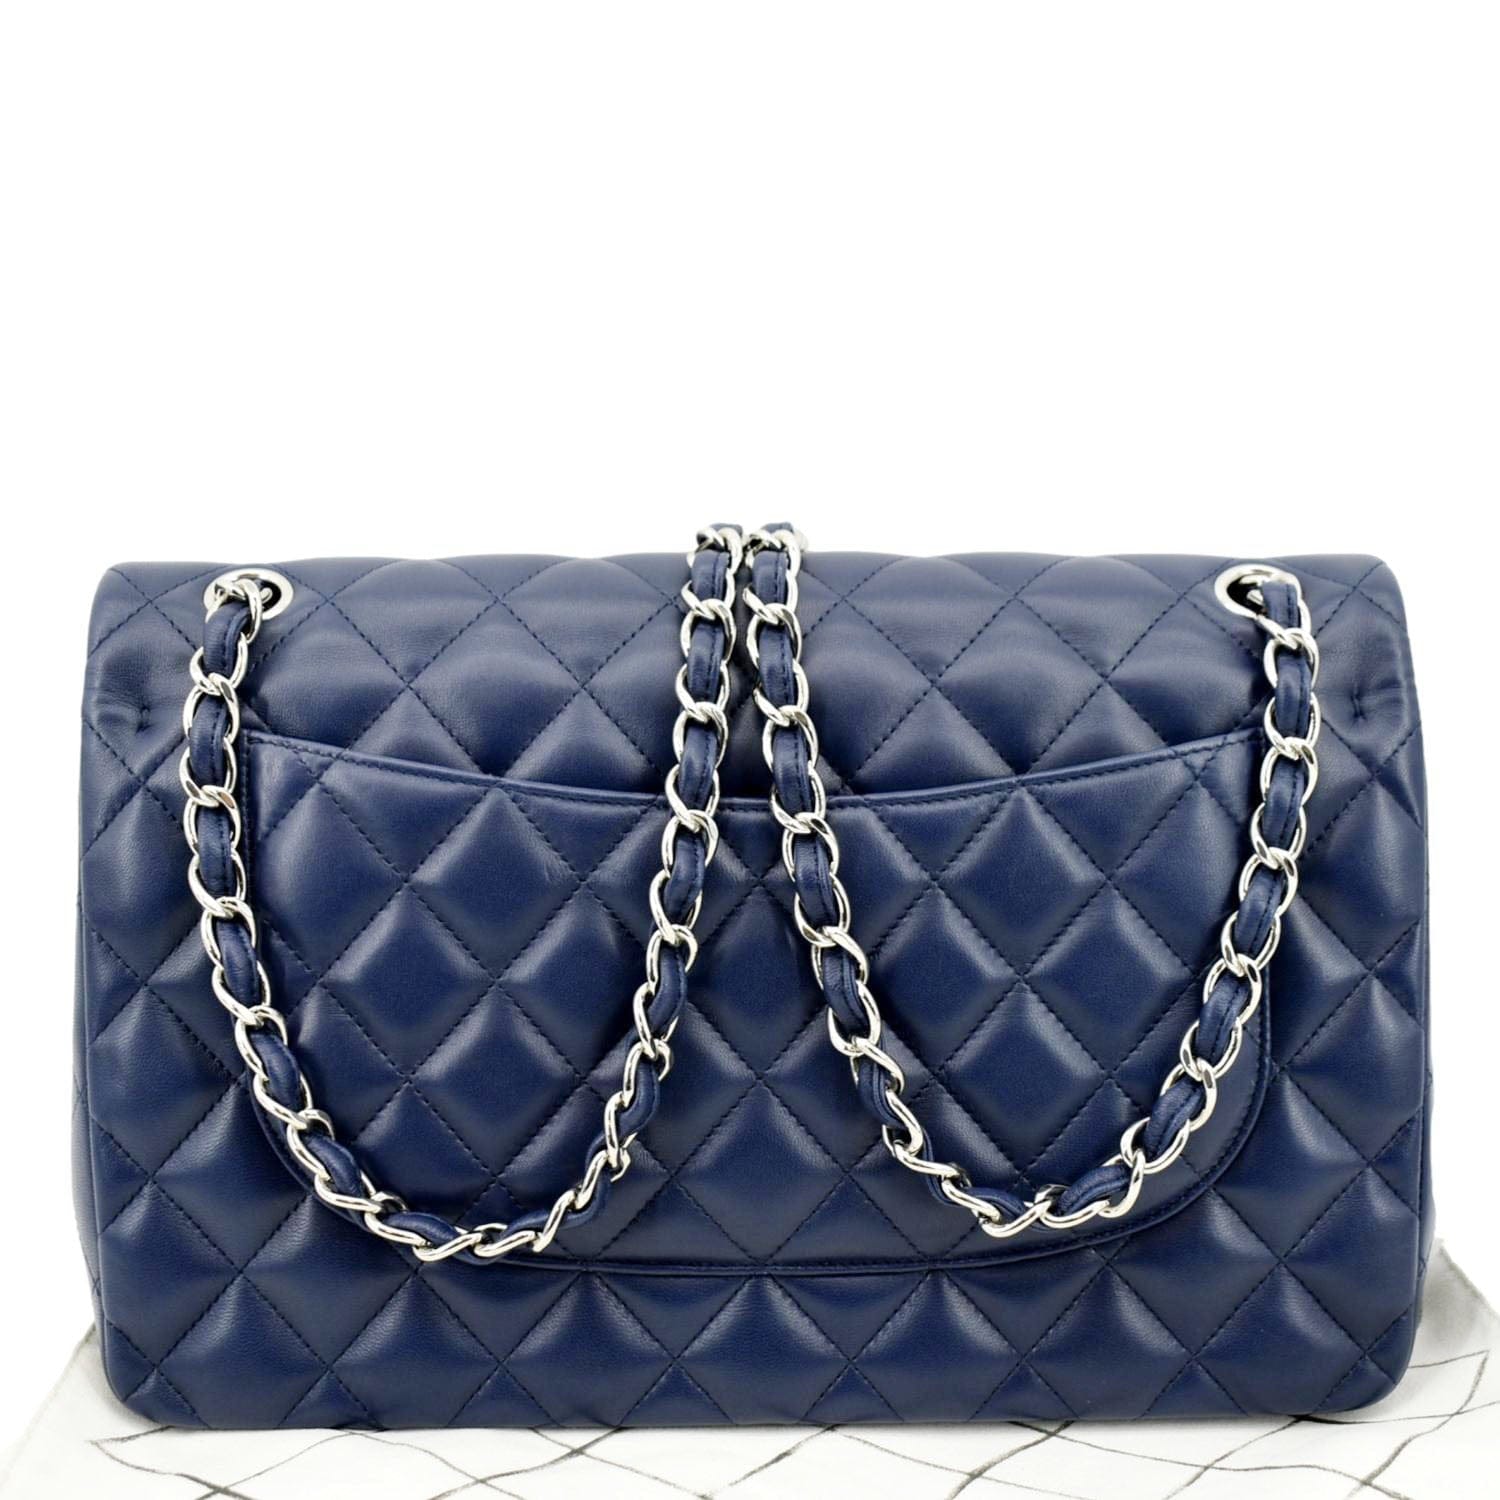 CHANEL Classic Jumbo Double Flap Quilted Caviar Leather Shoulder Bag B